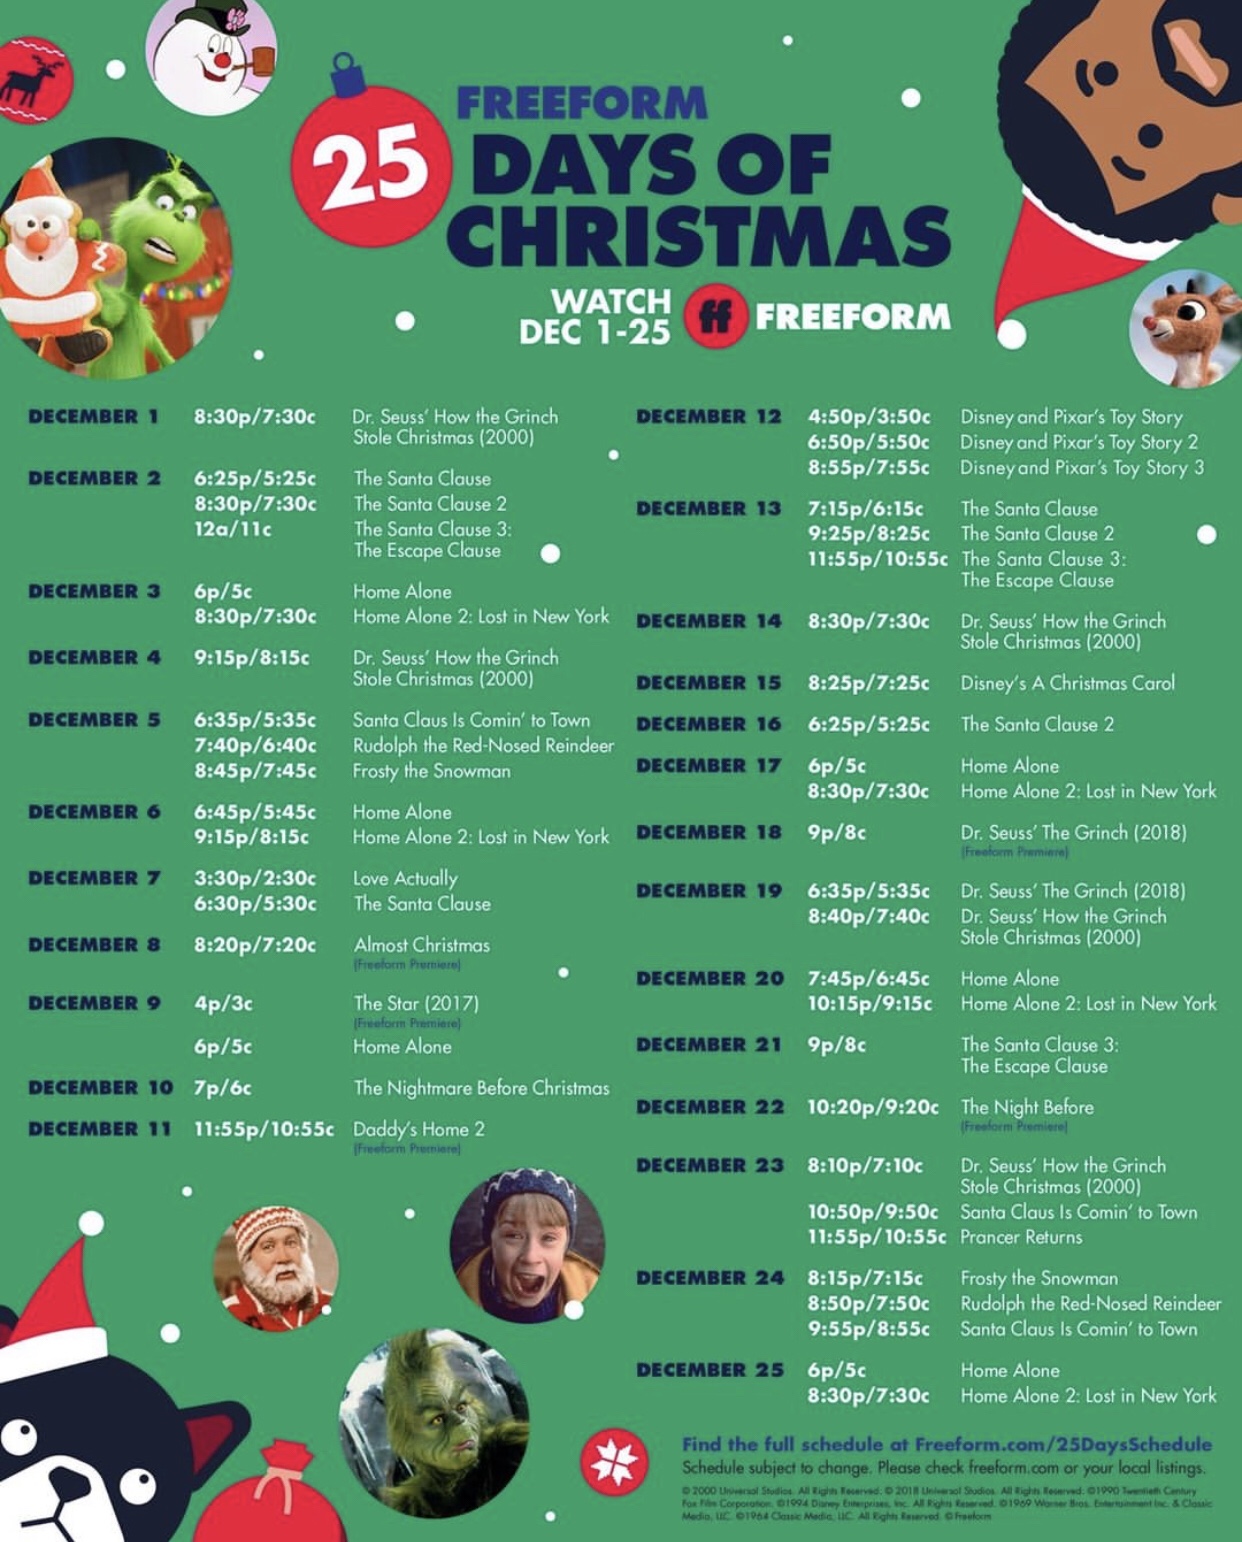 freeform-releases-25-days-of-christmas-schedule-have-a-joyful-day